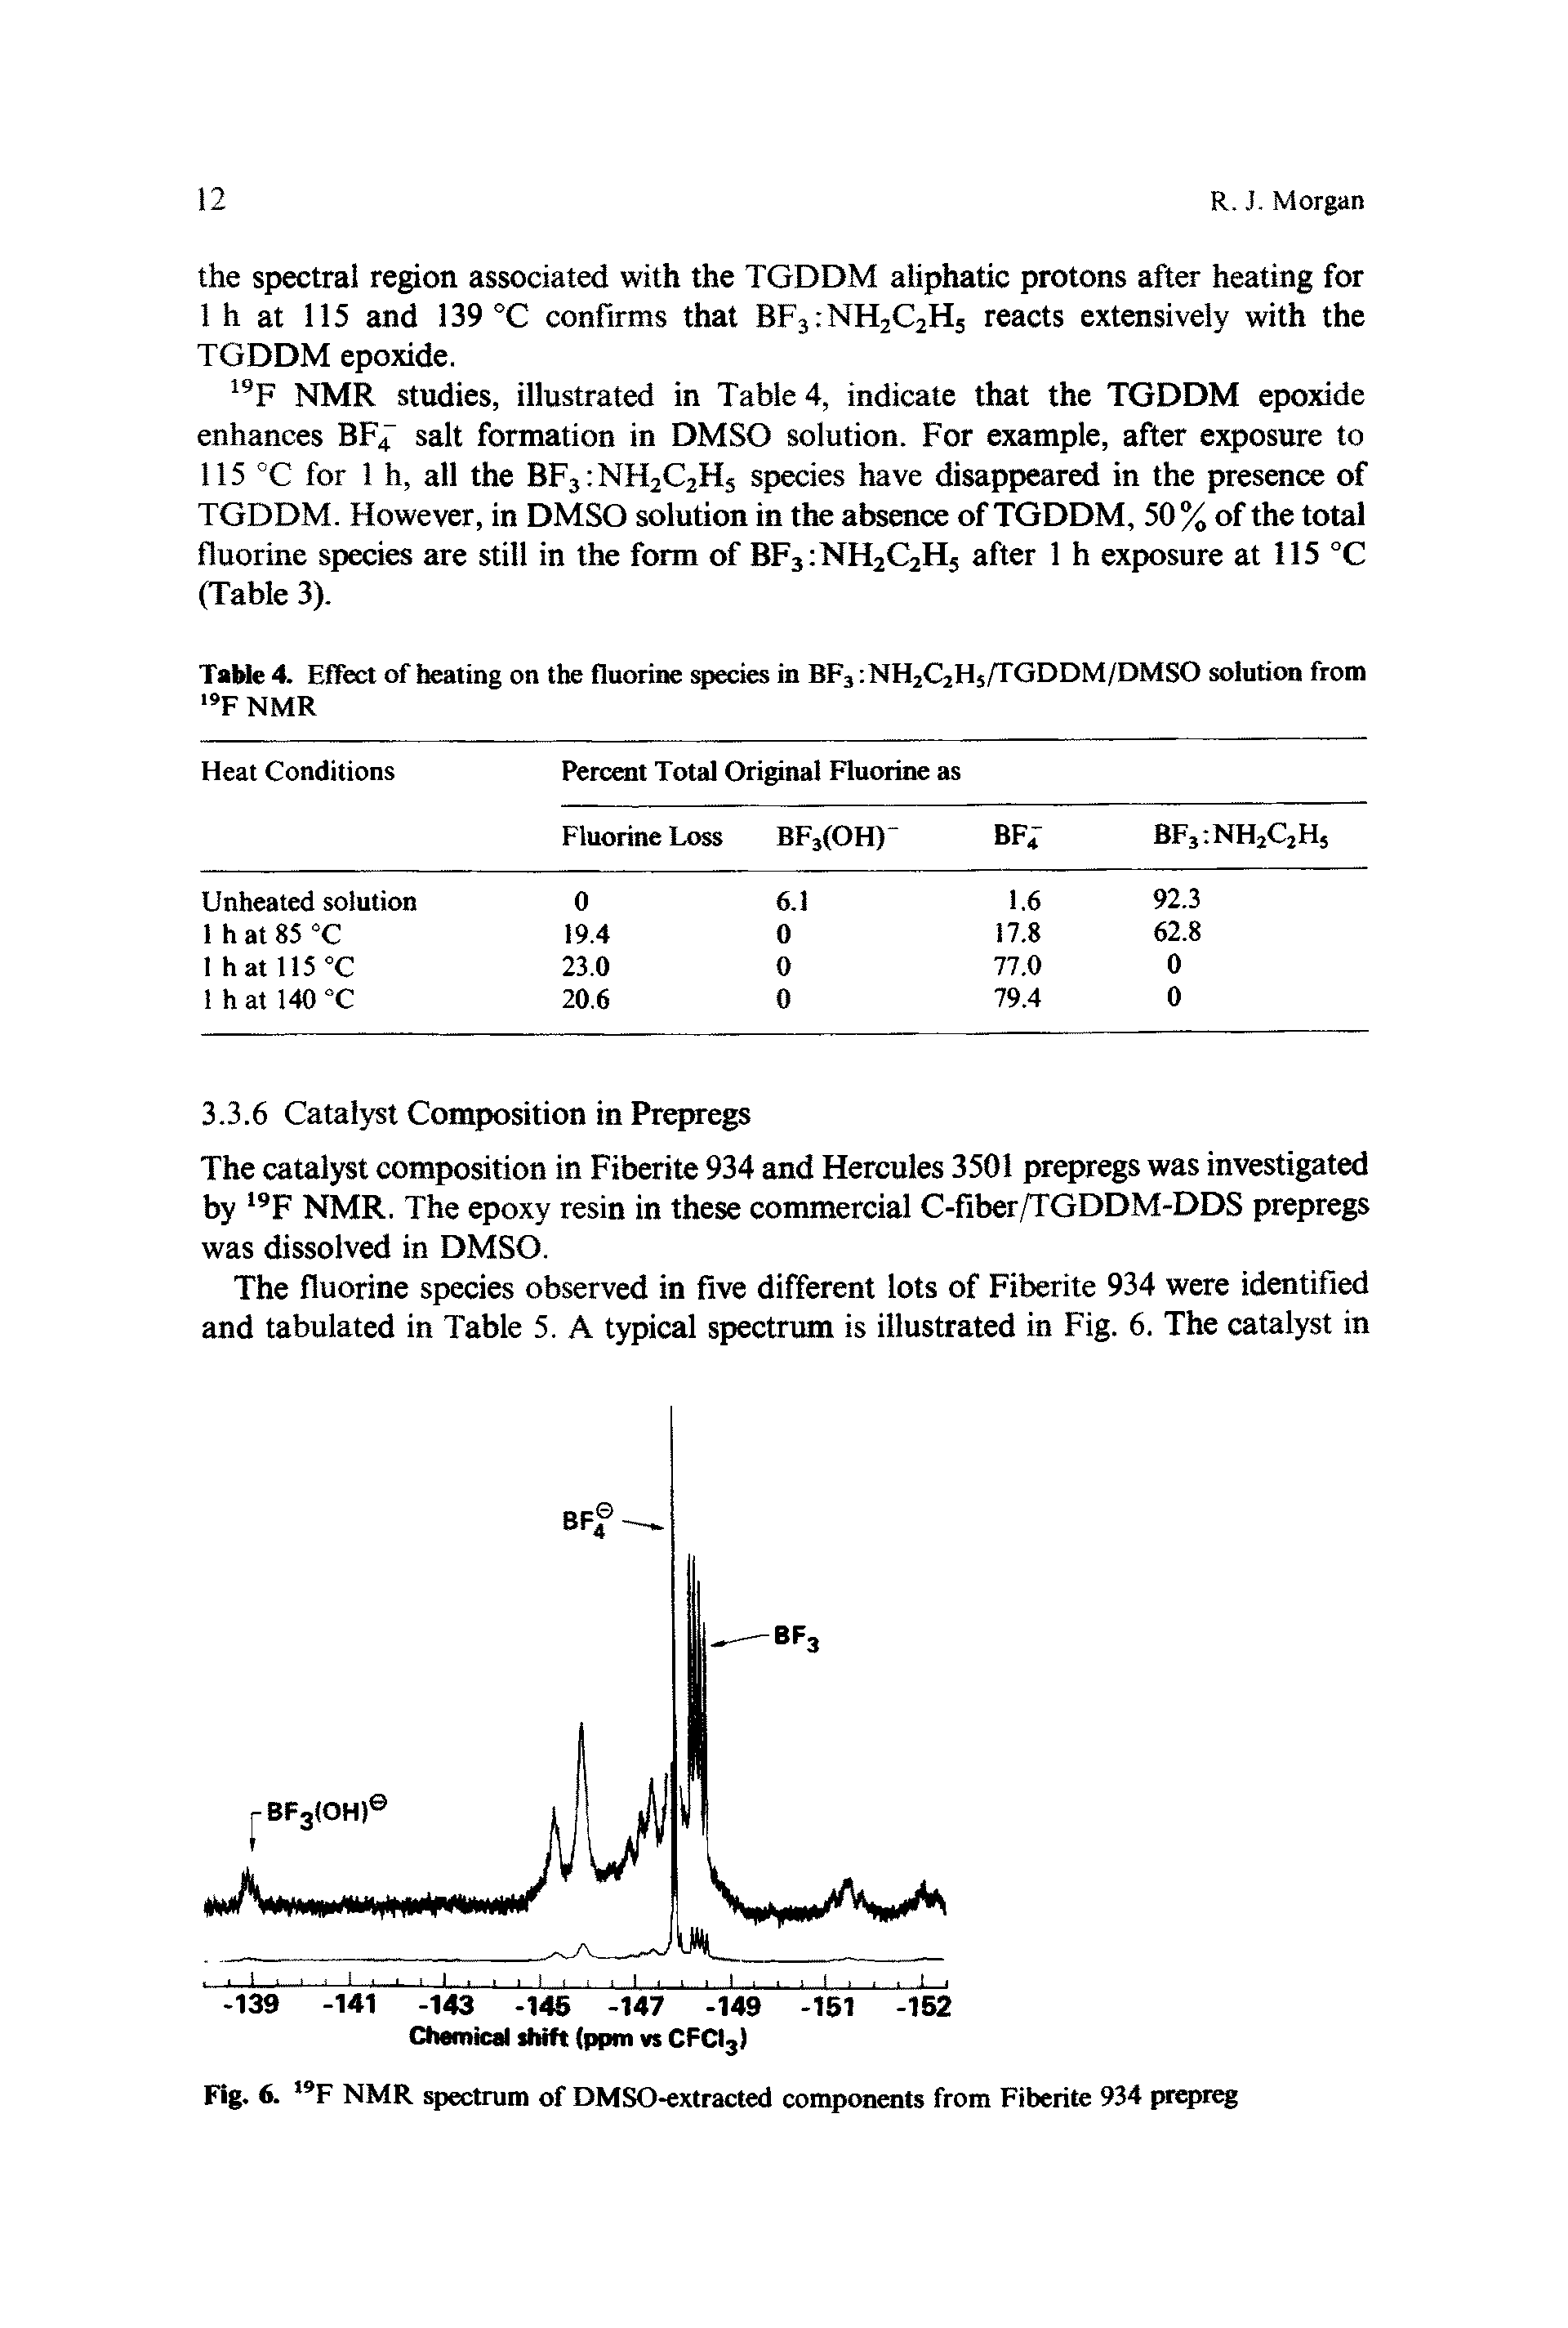 Fig. 6., 9F NMR spectrum of DMSO-extracted components from Fiberite 934 prepreg...